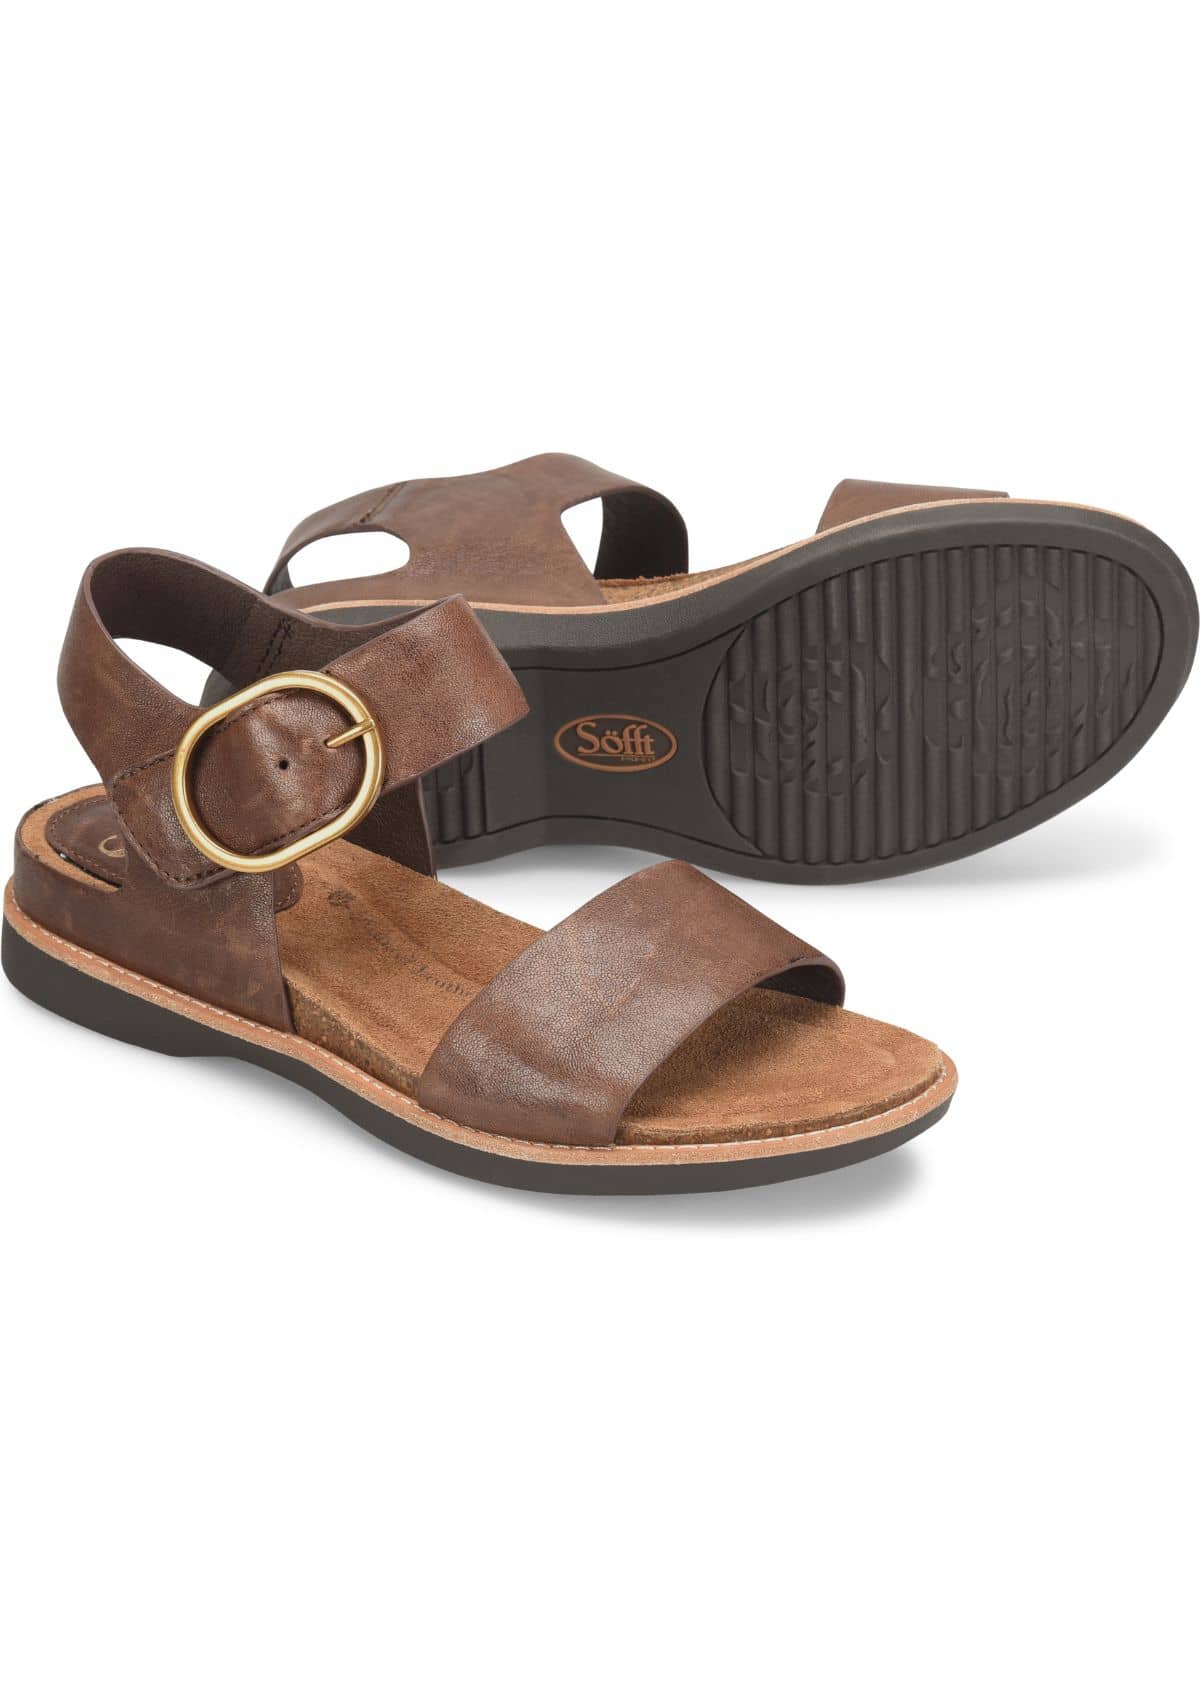 Bali Leather Strap Sandal - Cocoa Brown -Sofft Shoe Co- Ruby Jane-